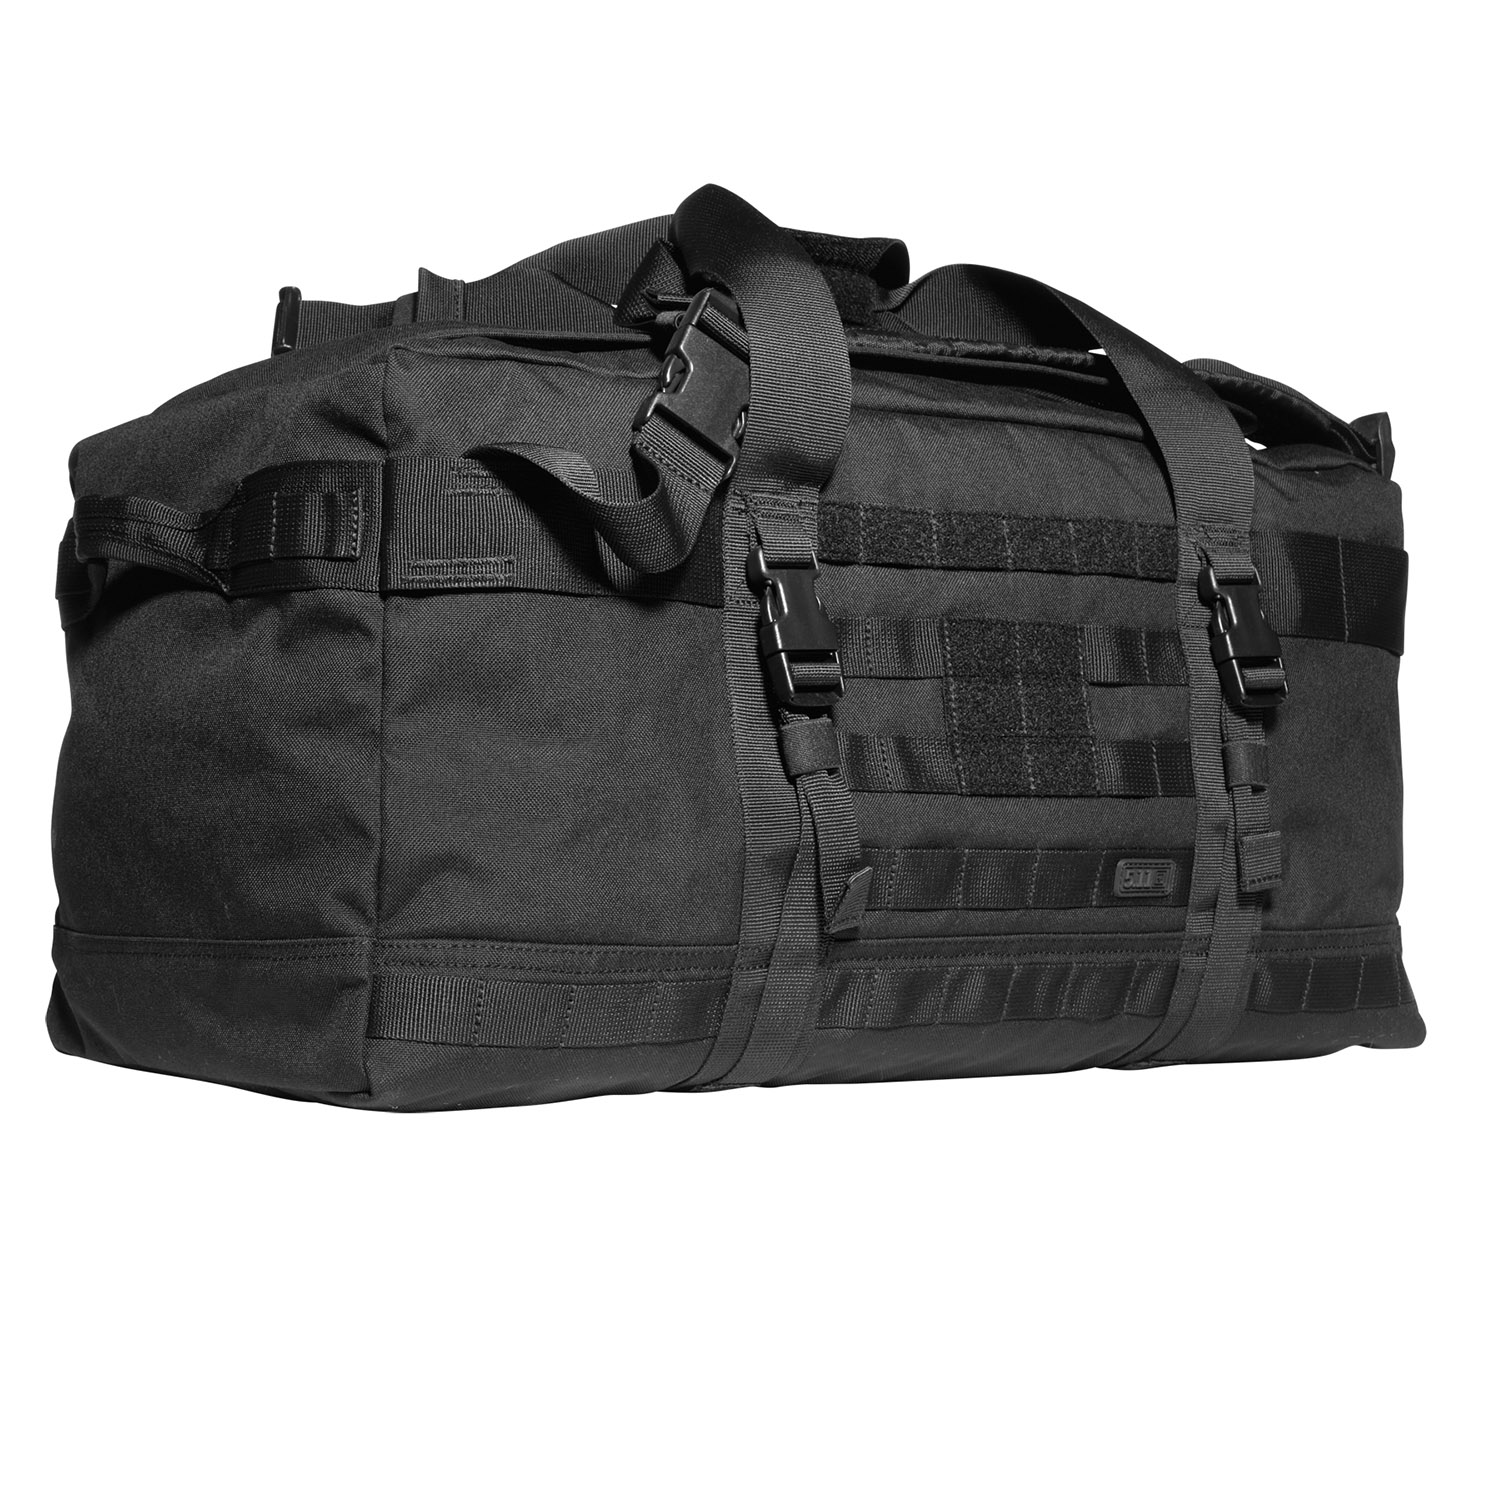 New loadbearing products from 5.11 tactical available now